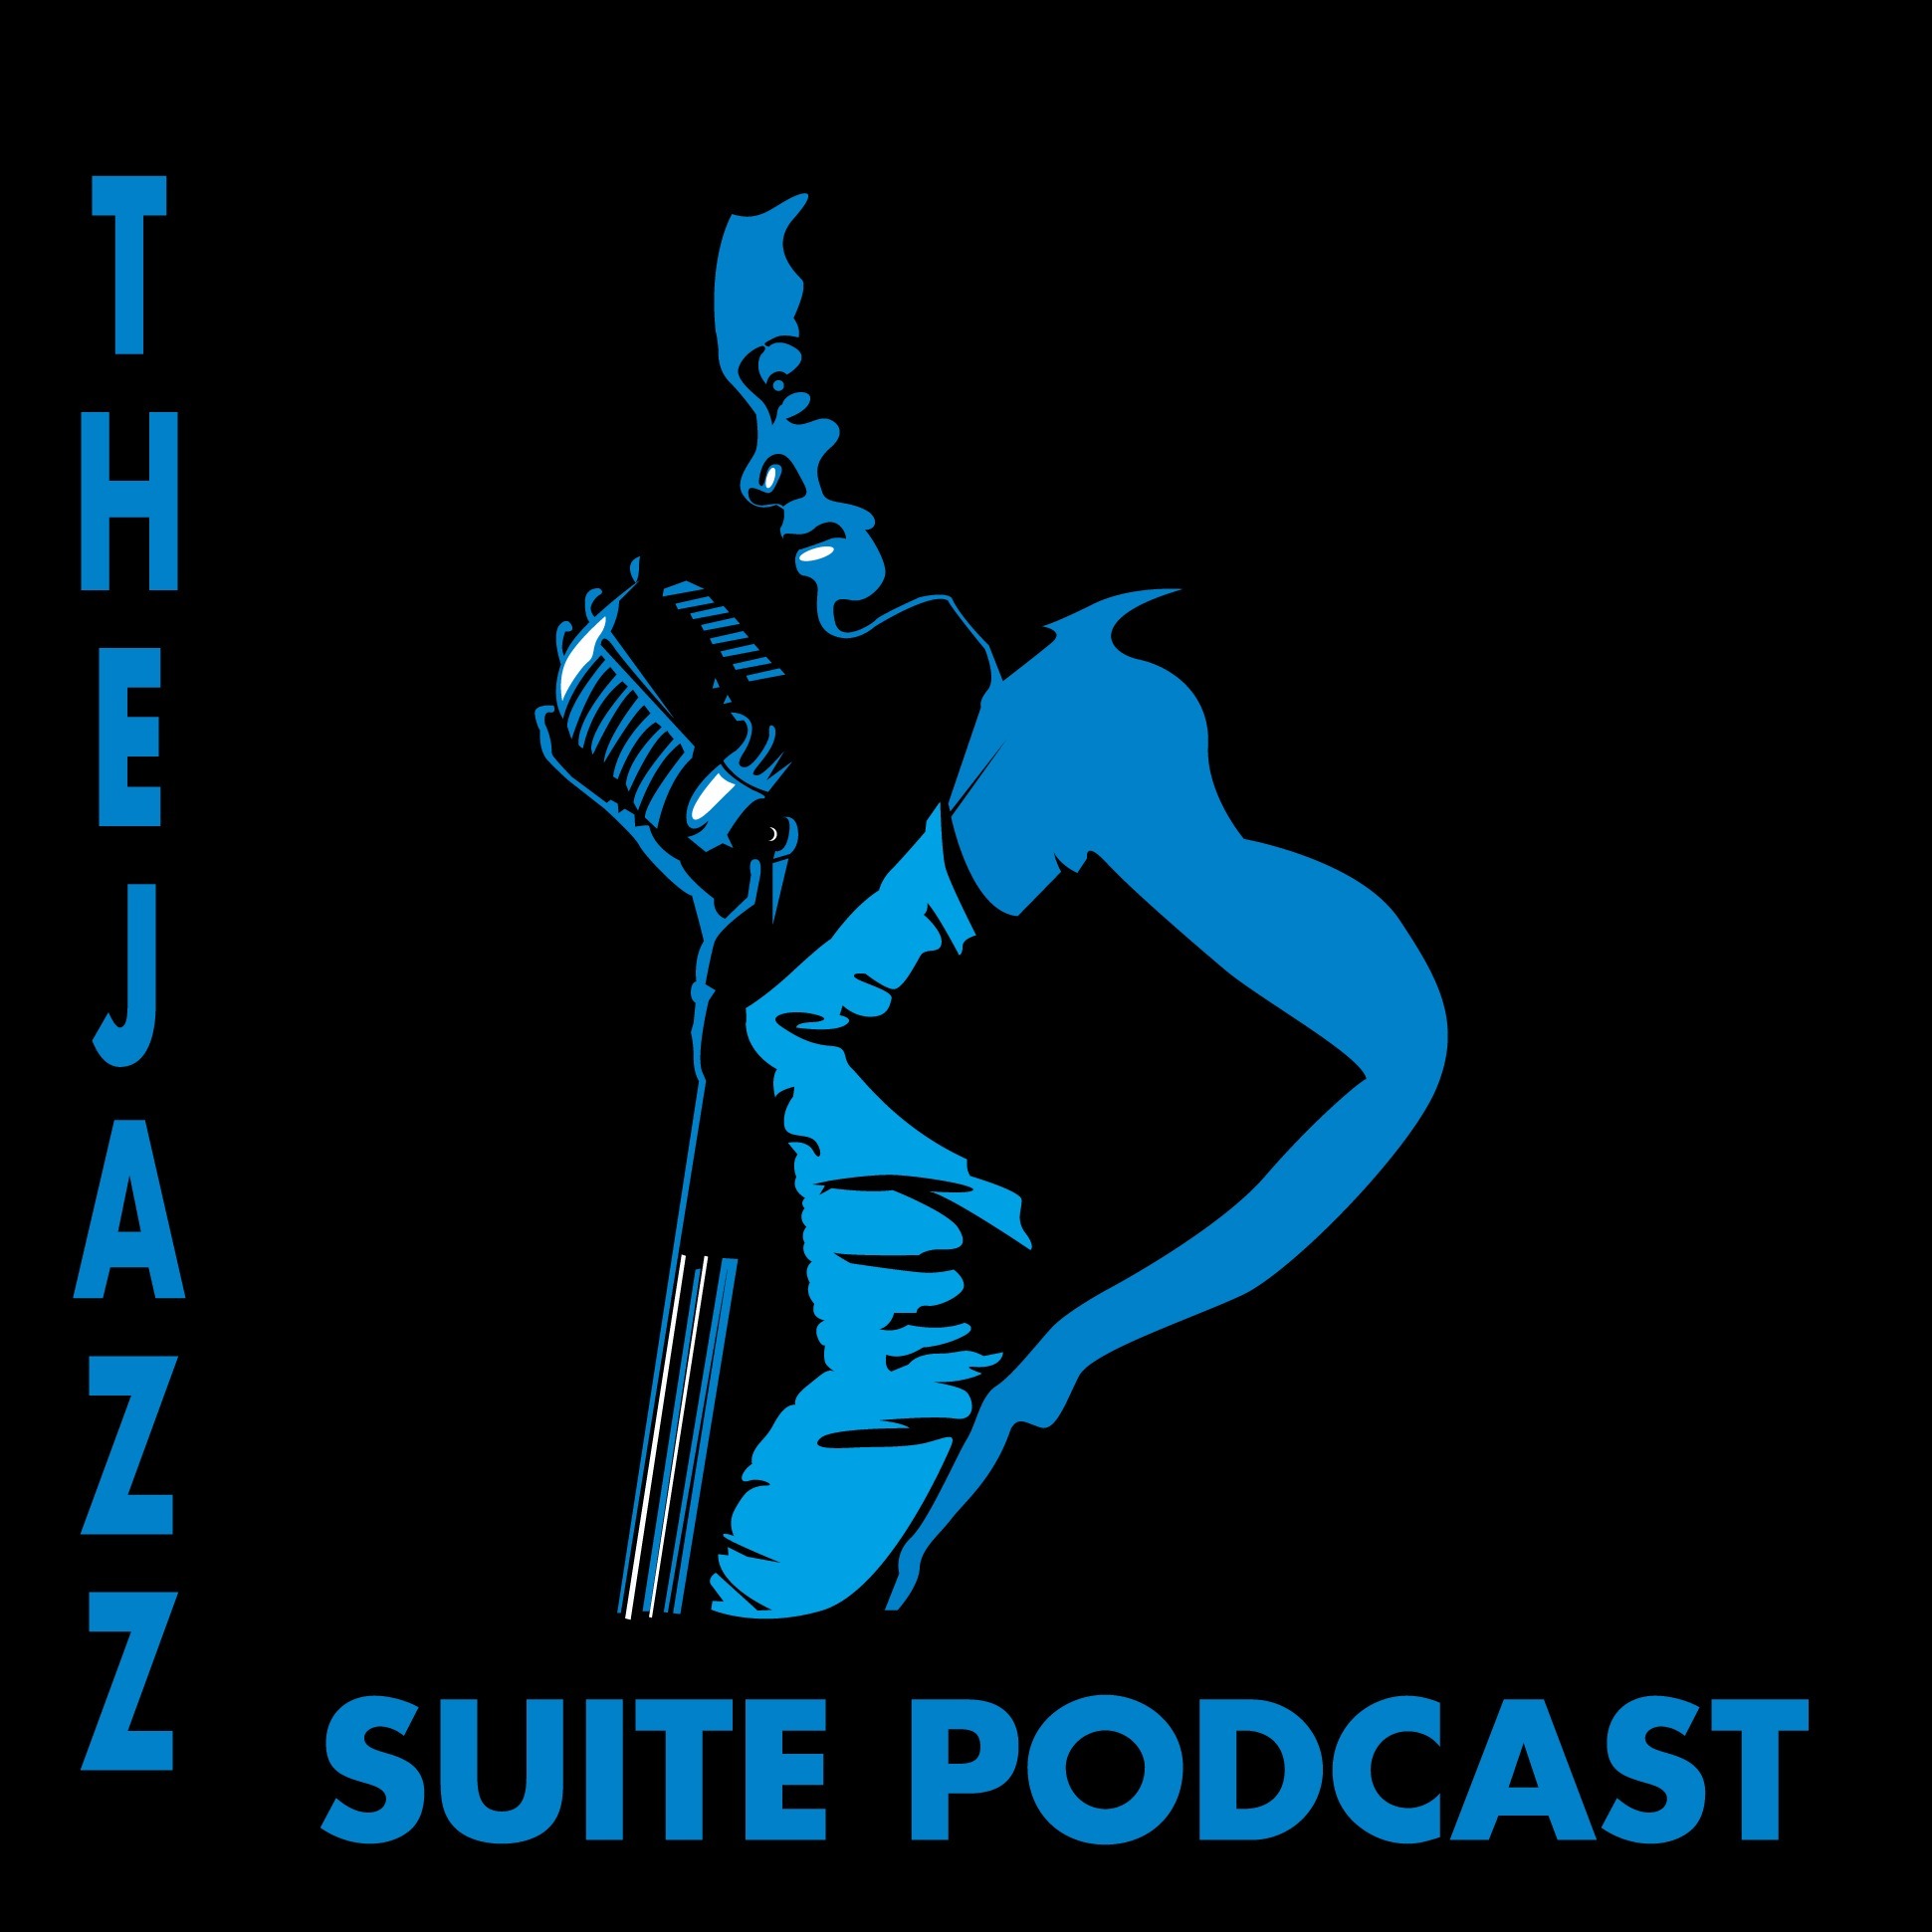 The Jazz Suite Podcast Show #456